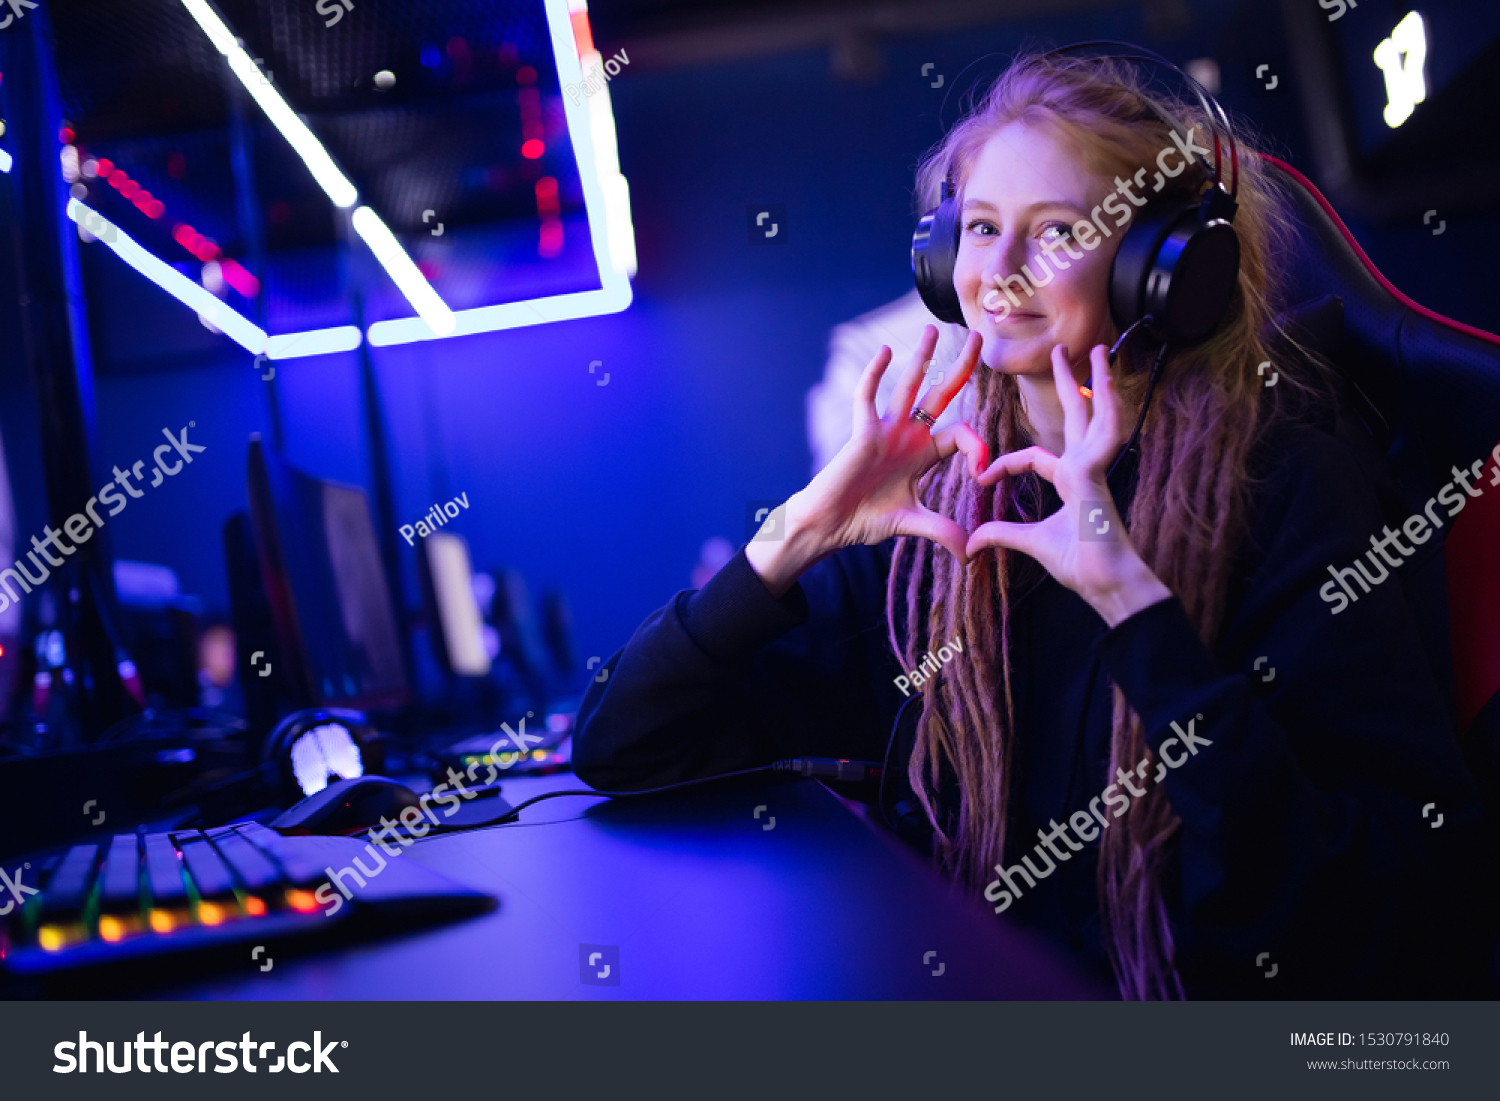 Streamer beautiful girl shows heart sign with hands professional gamer playing online games computer, neon color. #1530791840